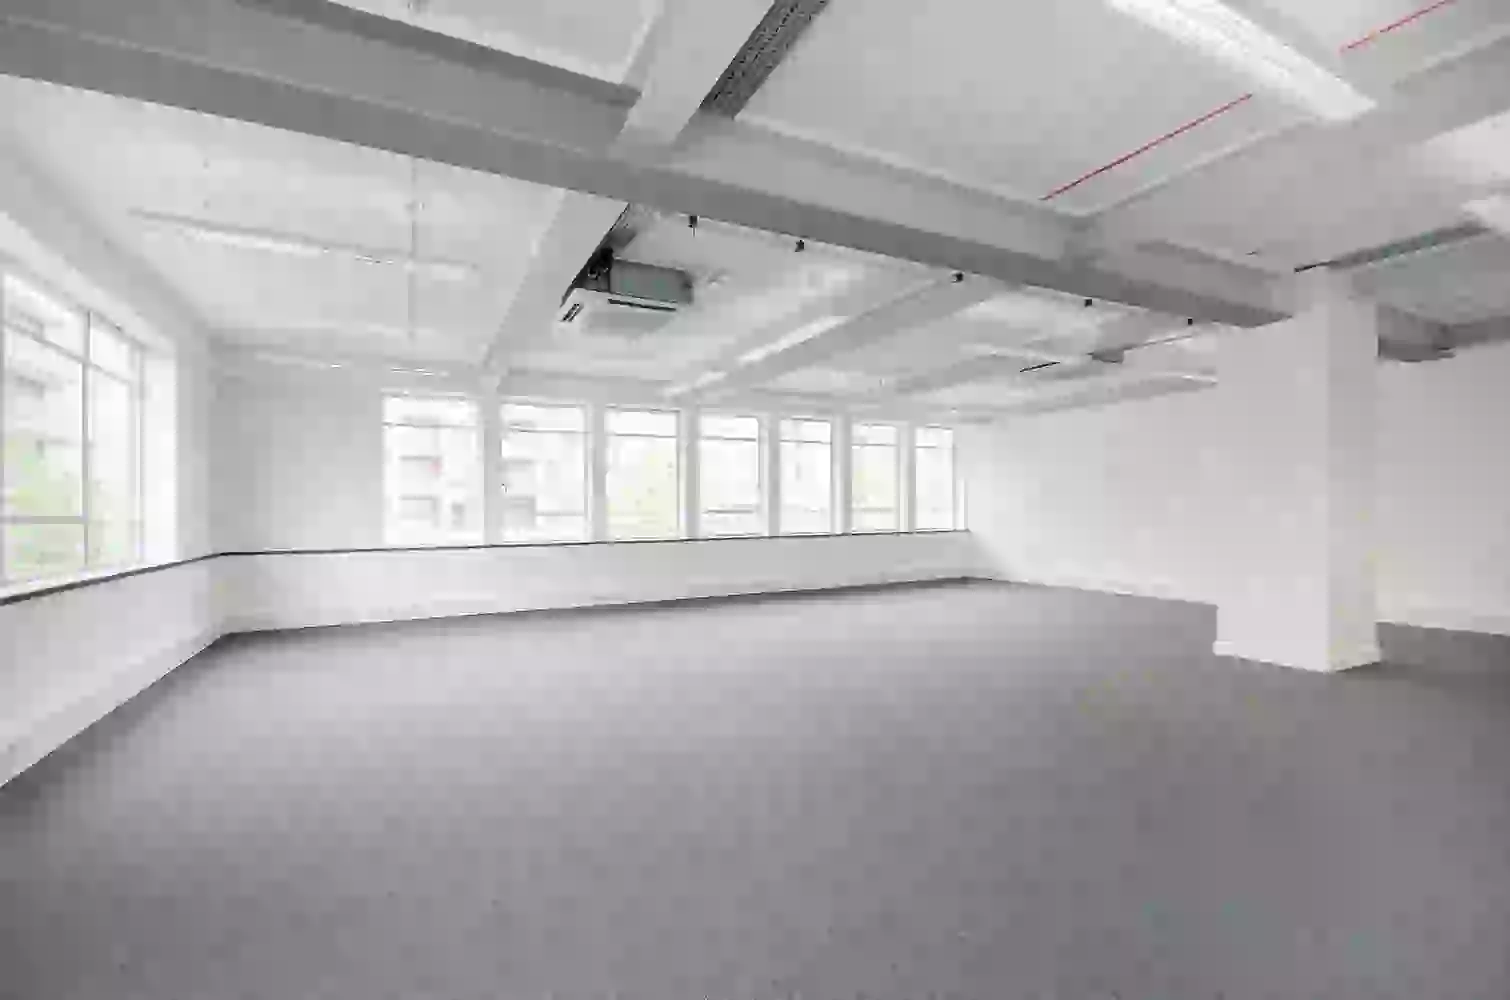 Office space to rent at Q West, Great West Road, Brentford, London, unit IH.1.15, 1001 sq ft (92 sq m).